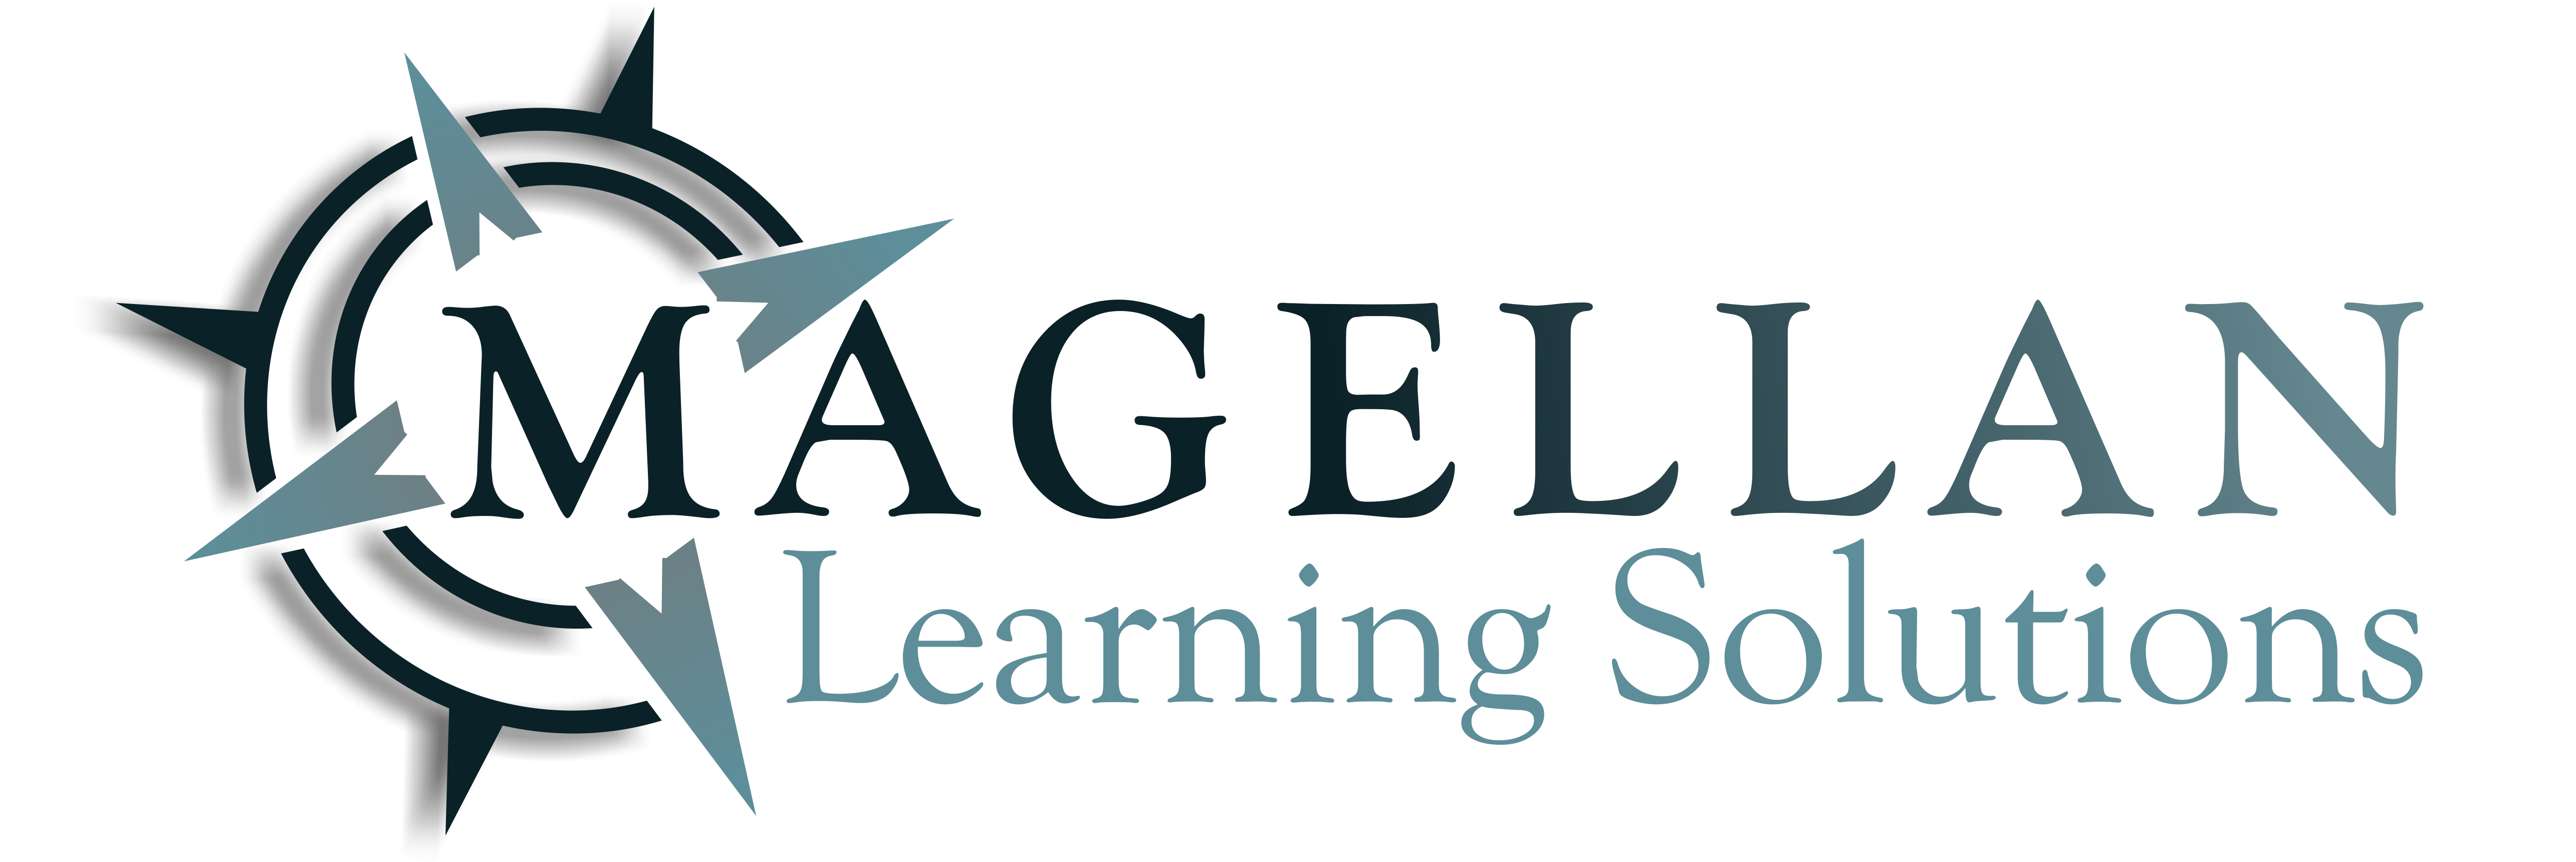 Magellan Learning Solutions Logo | The DART Collective